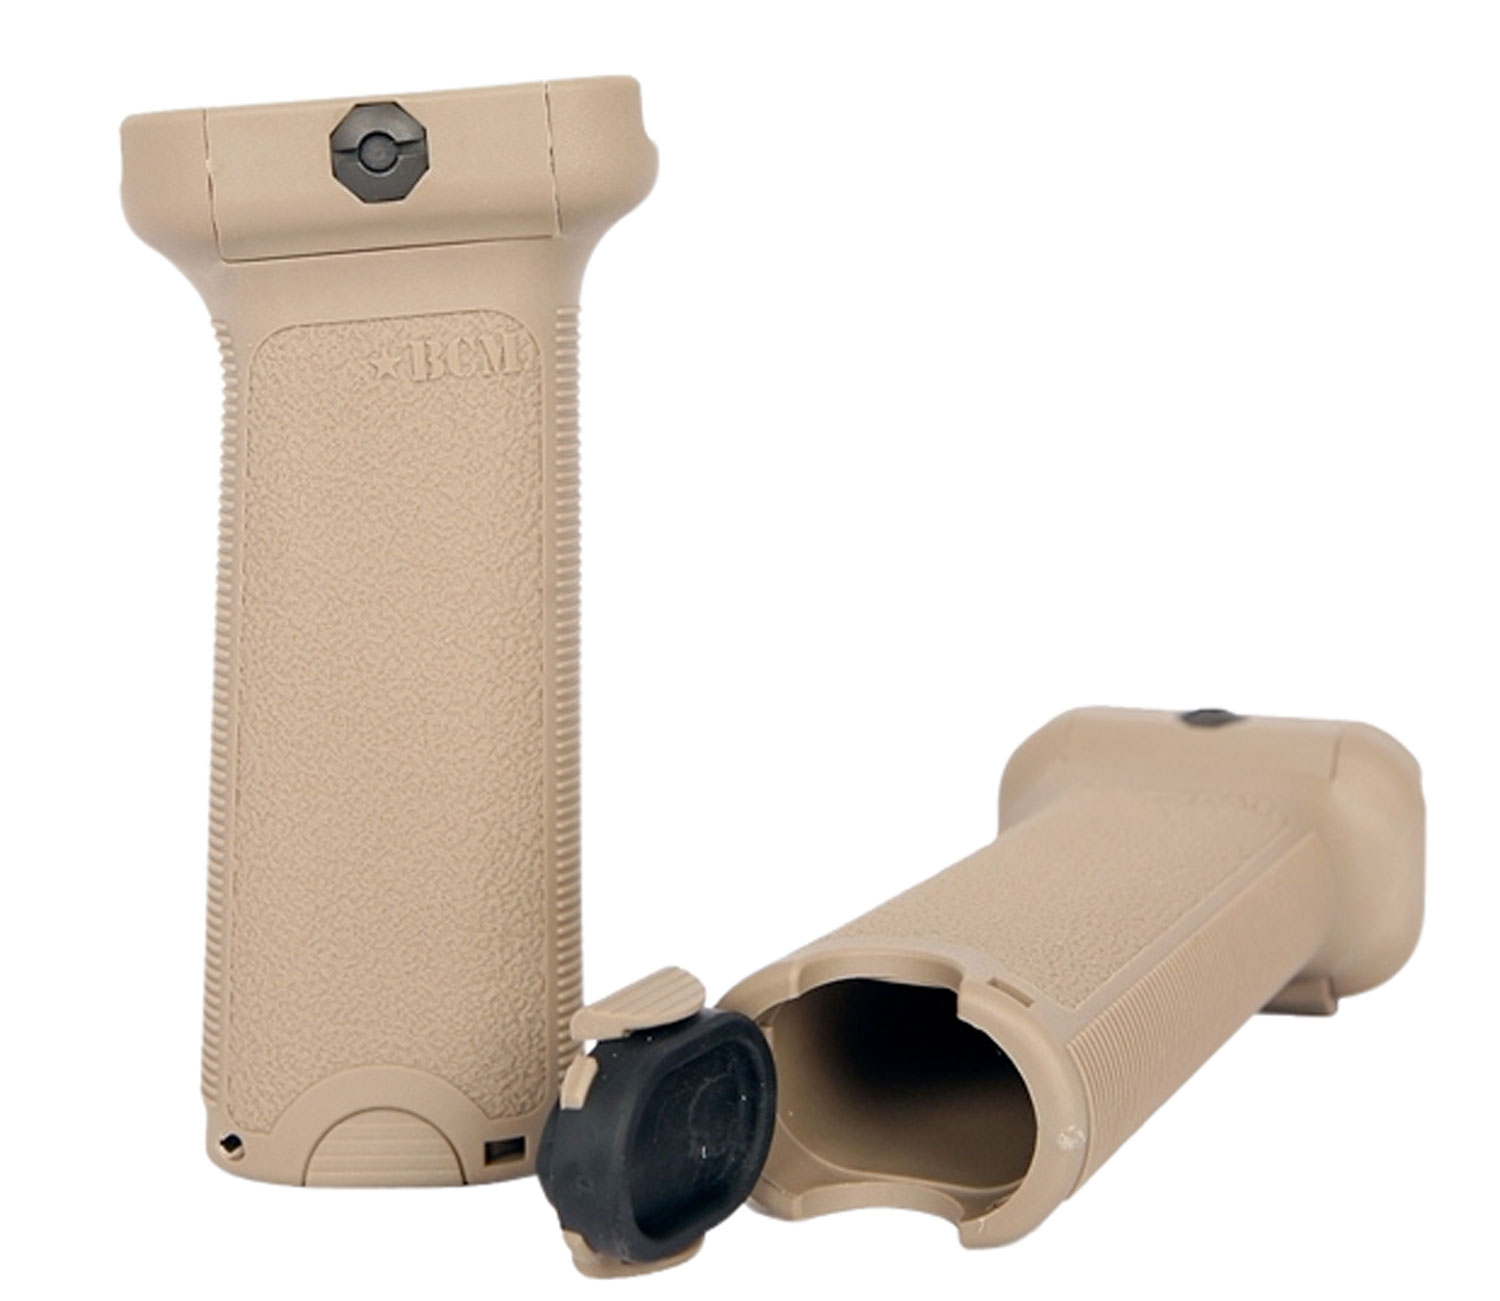 BCM  BCMGunfighter Vertical Grip Made of Polymer With Flat Dark Earth Aggressive Textured Finish with Storage Compartment for Picatinny Rail